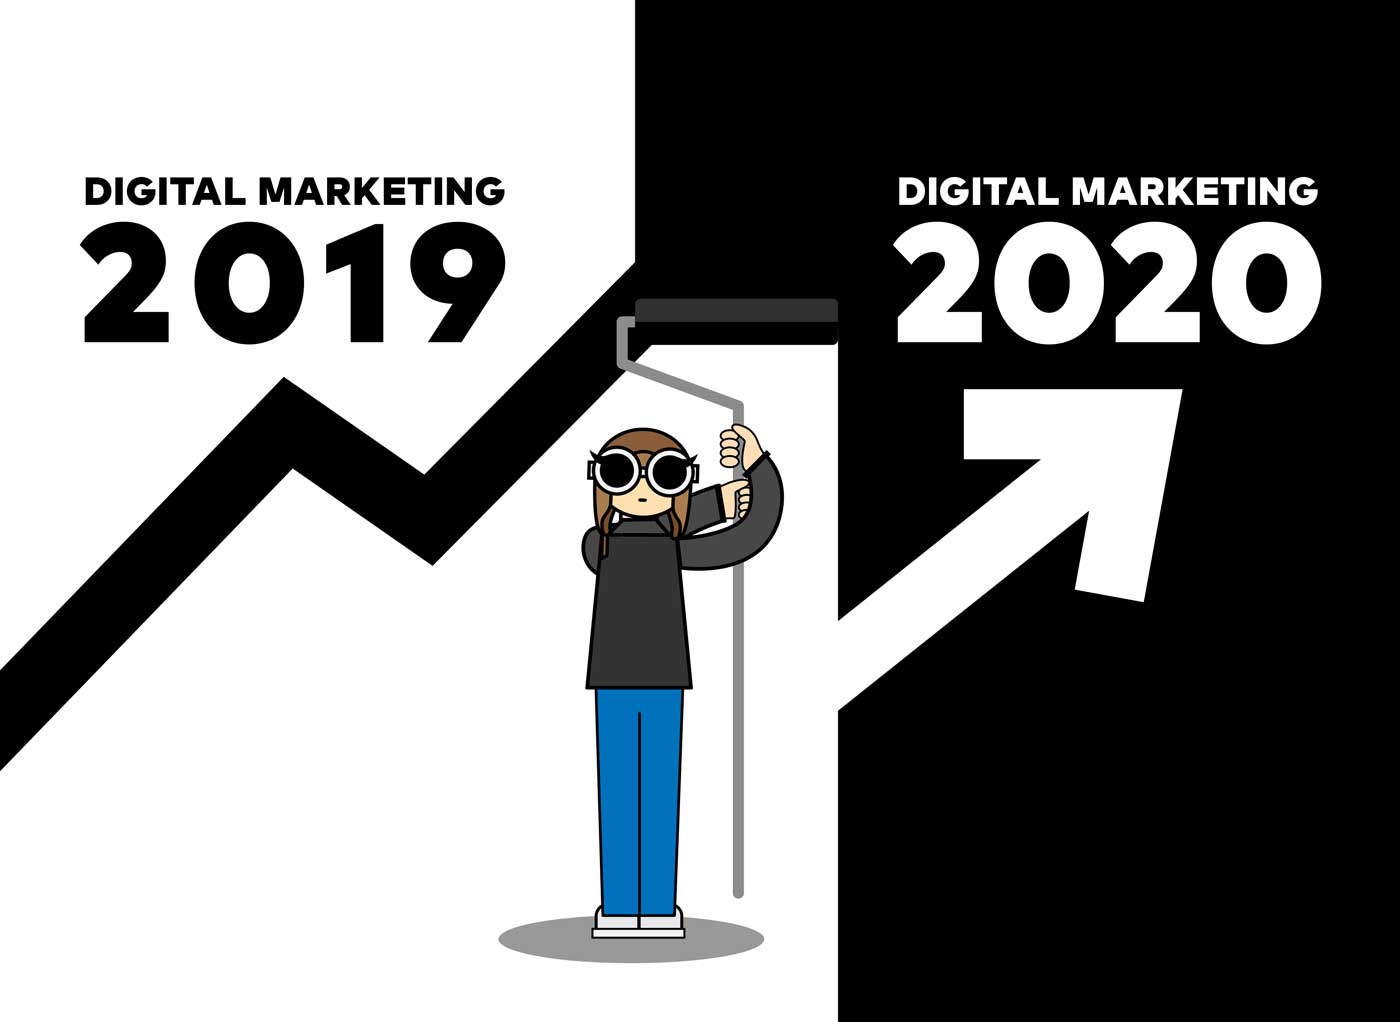 Digital Marketing from 2019 to 2020